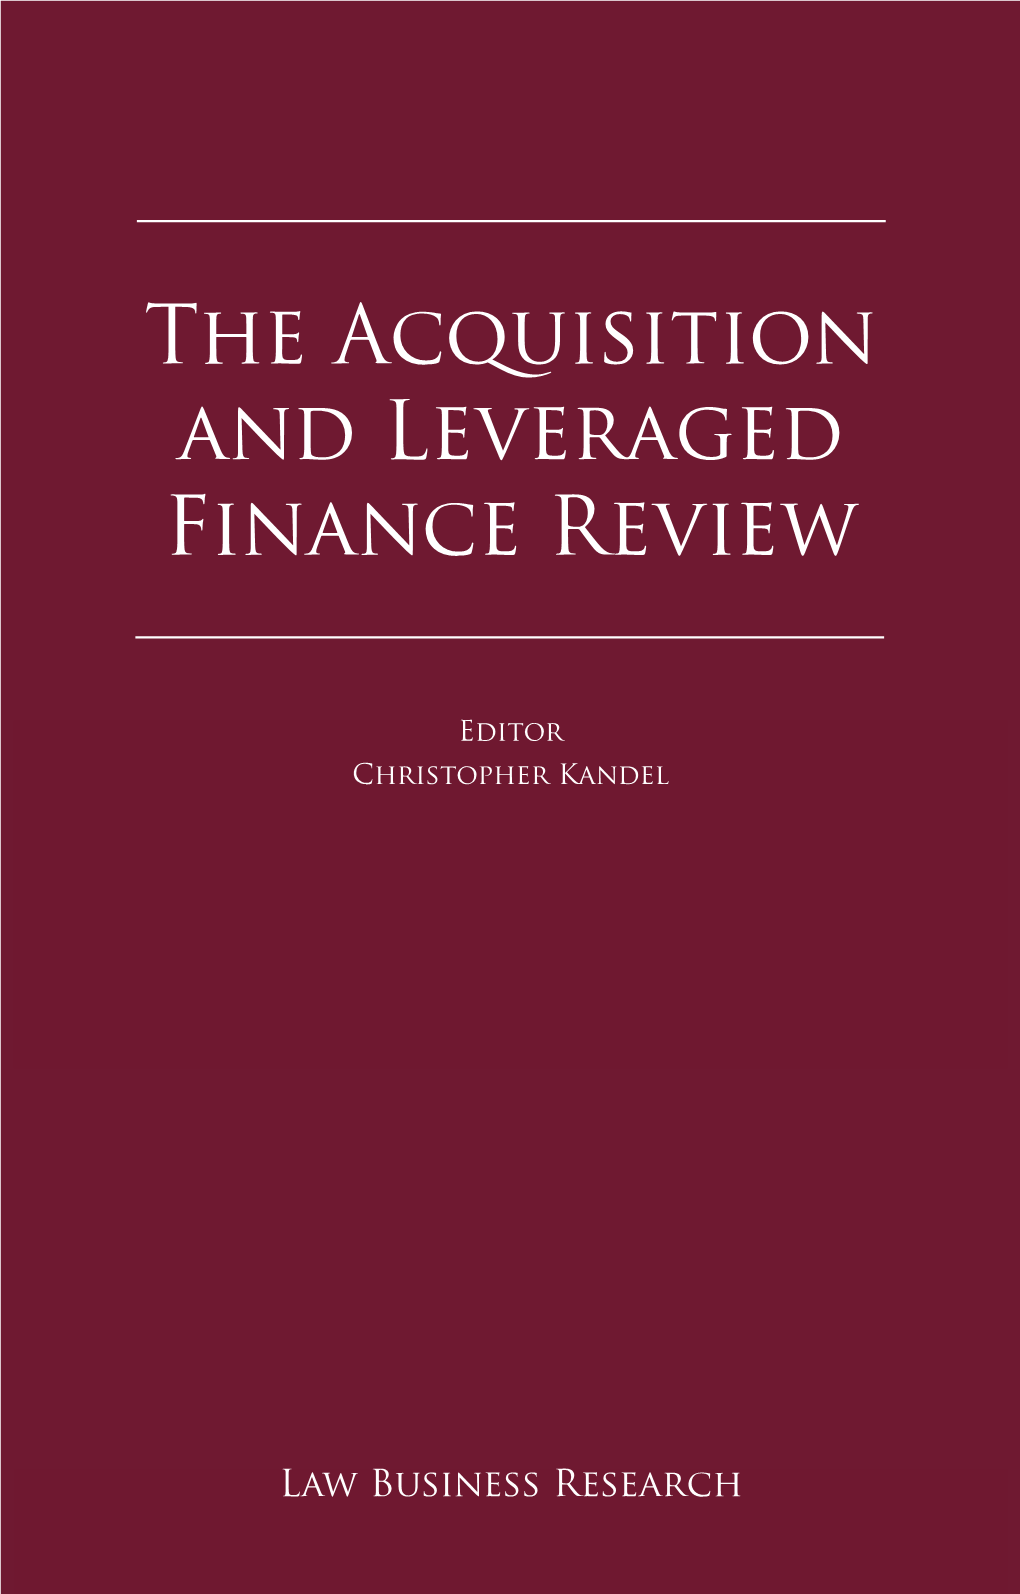 The Acquisition and Leveraged Finance Review